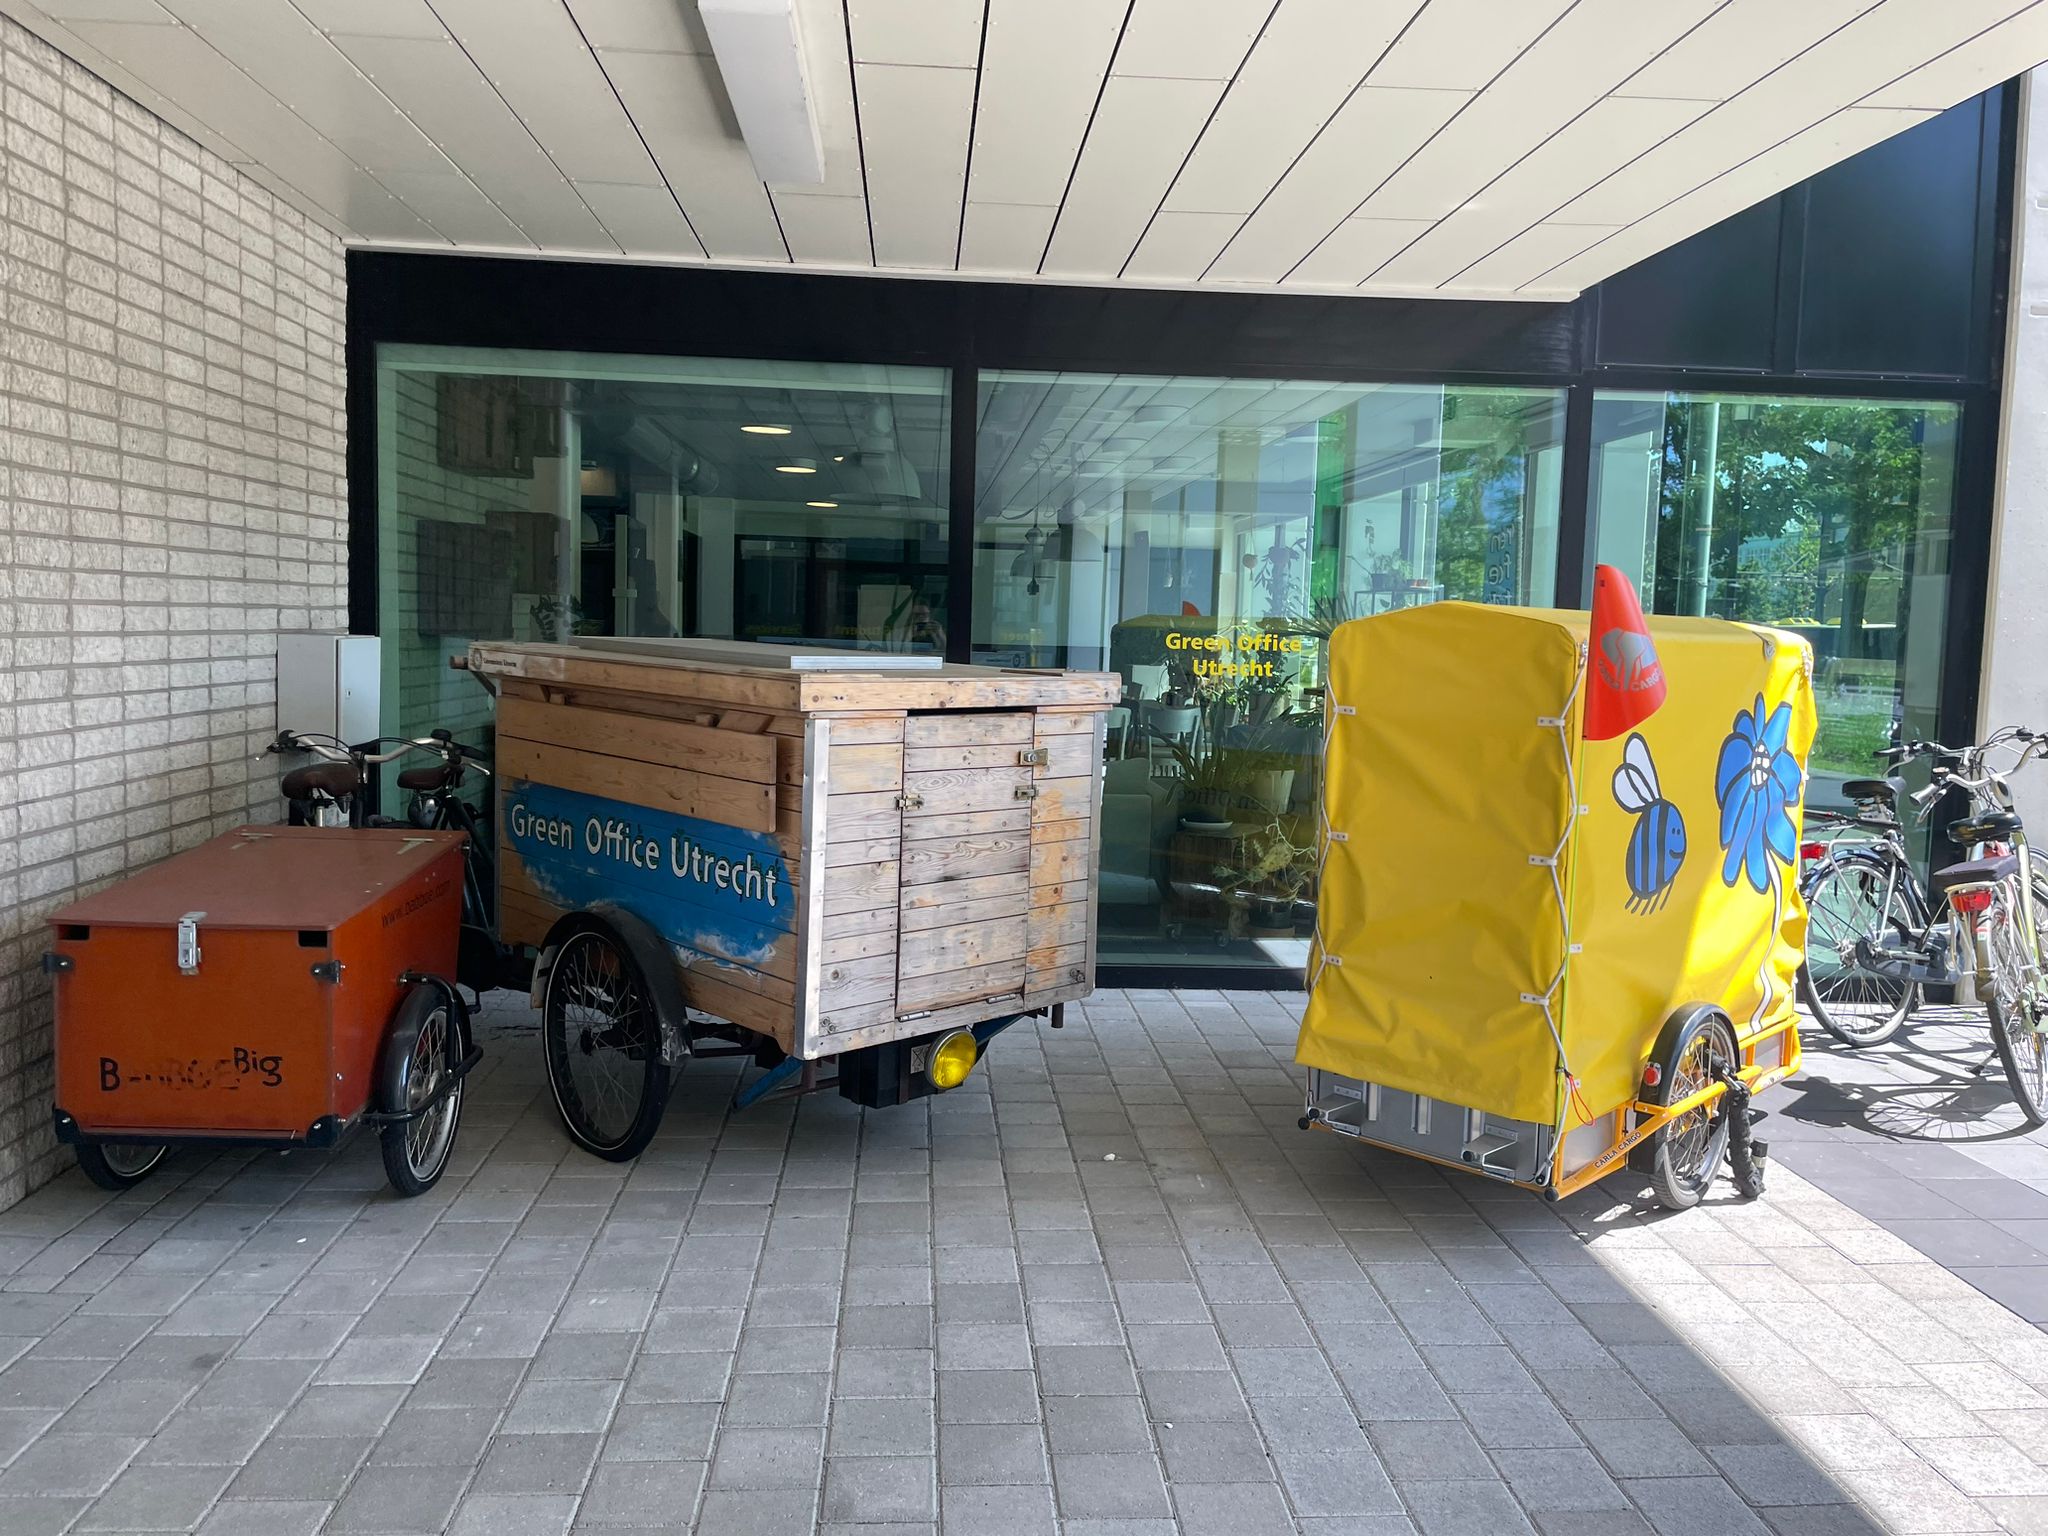 Three different cargo bikes, some with very large transport boxes, are available for free loan in front of the Green Office